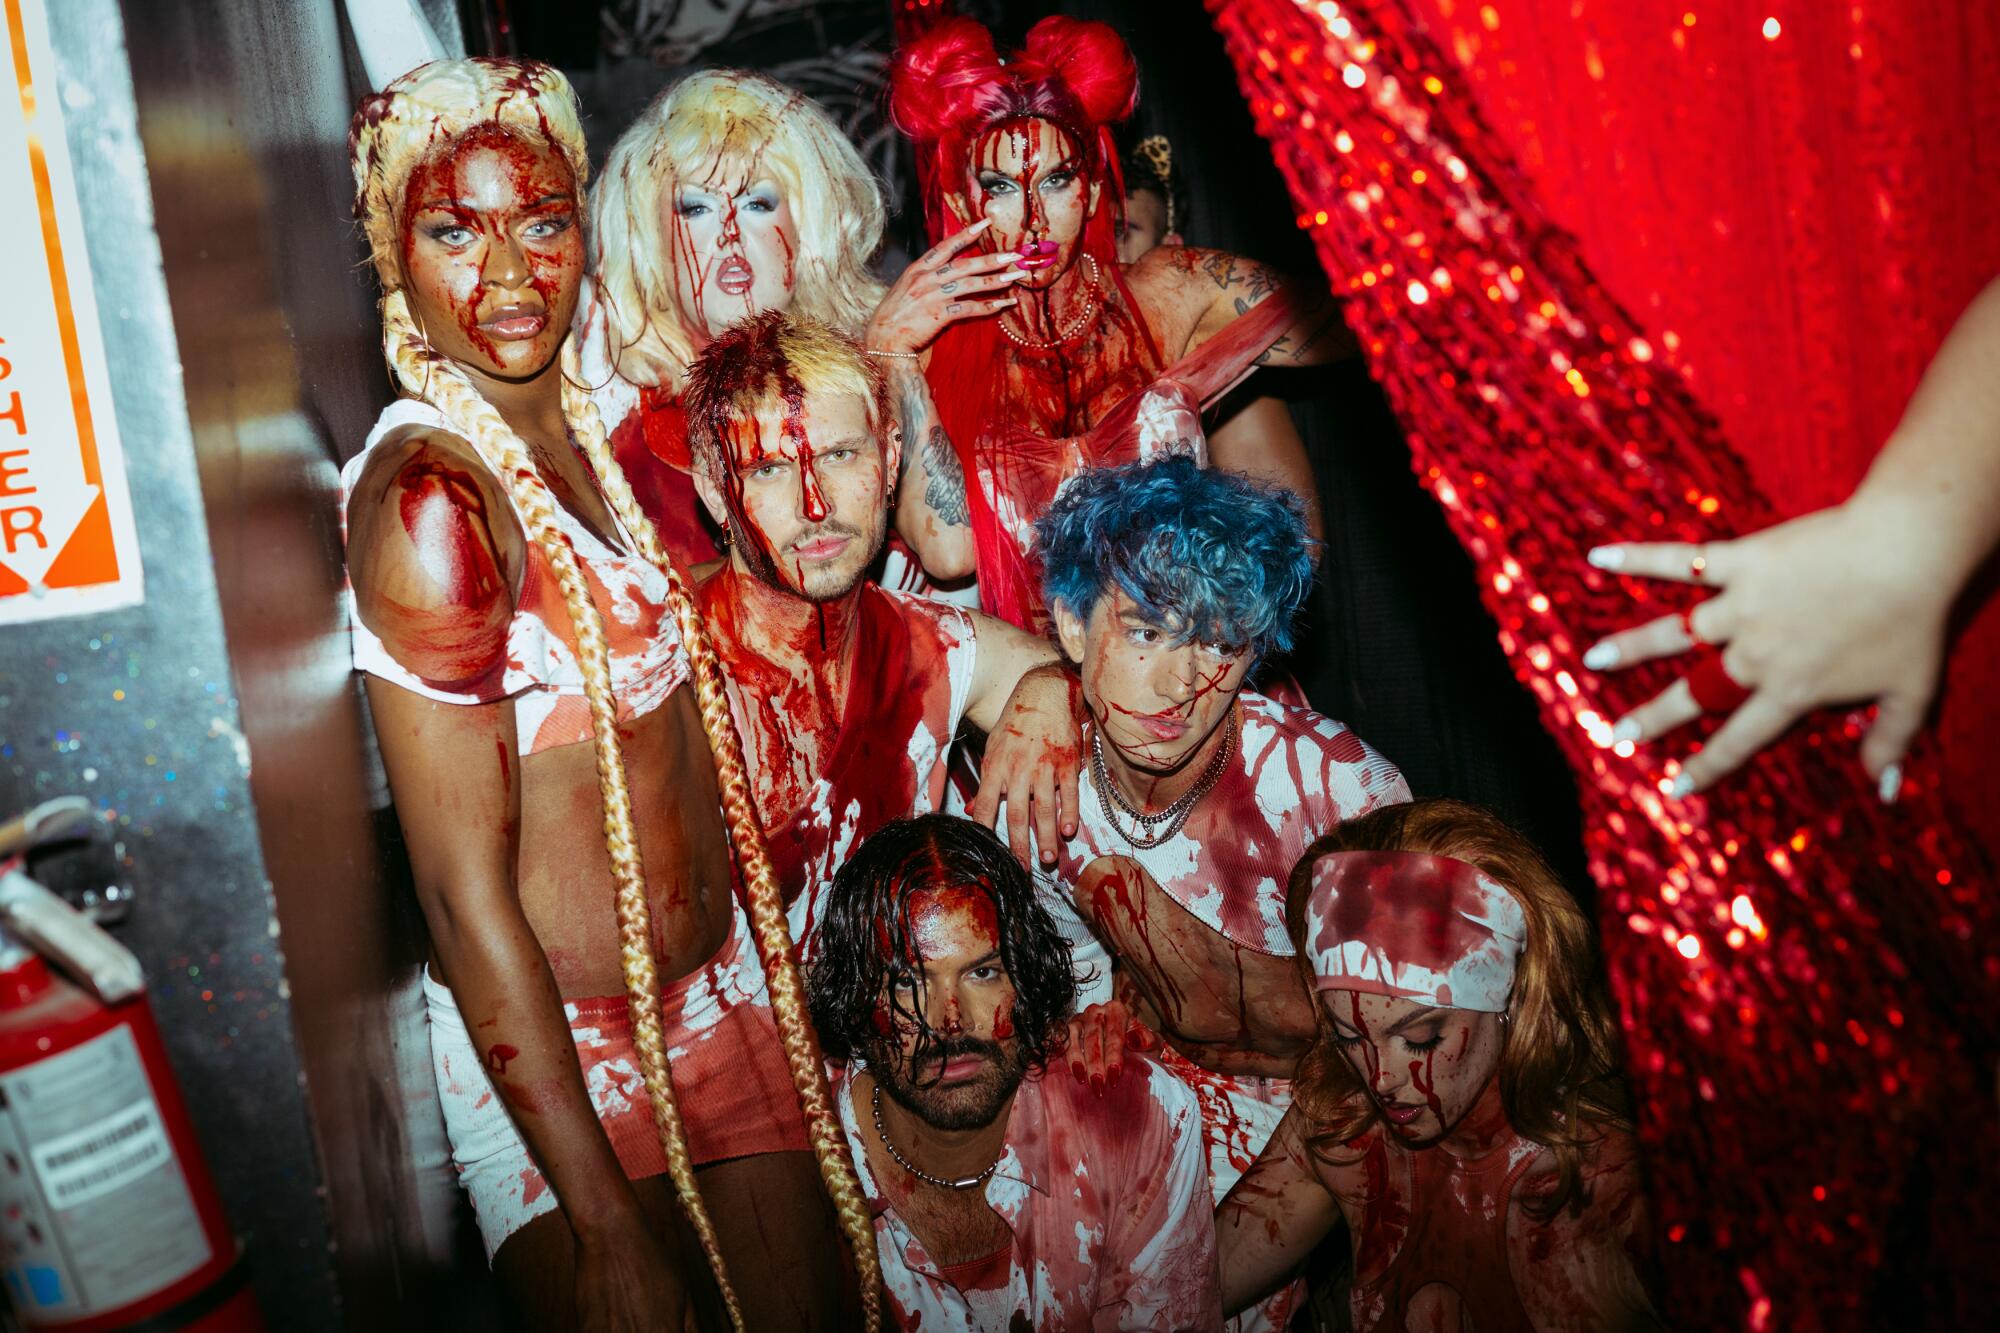 A hand pulls back a spangly curtain to reveal people dressed in white and covered in fake blood.